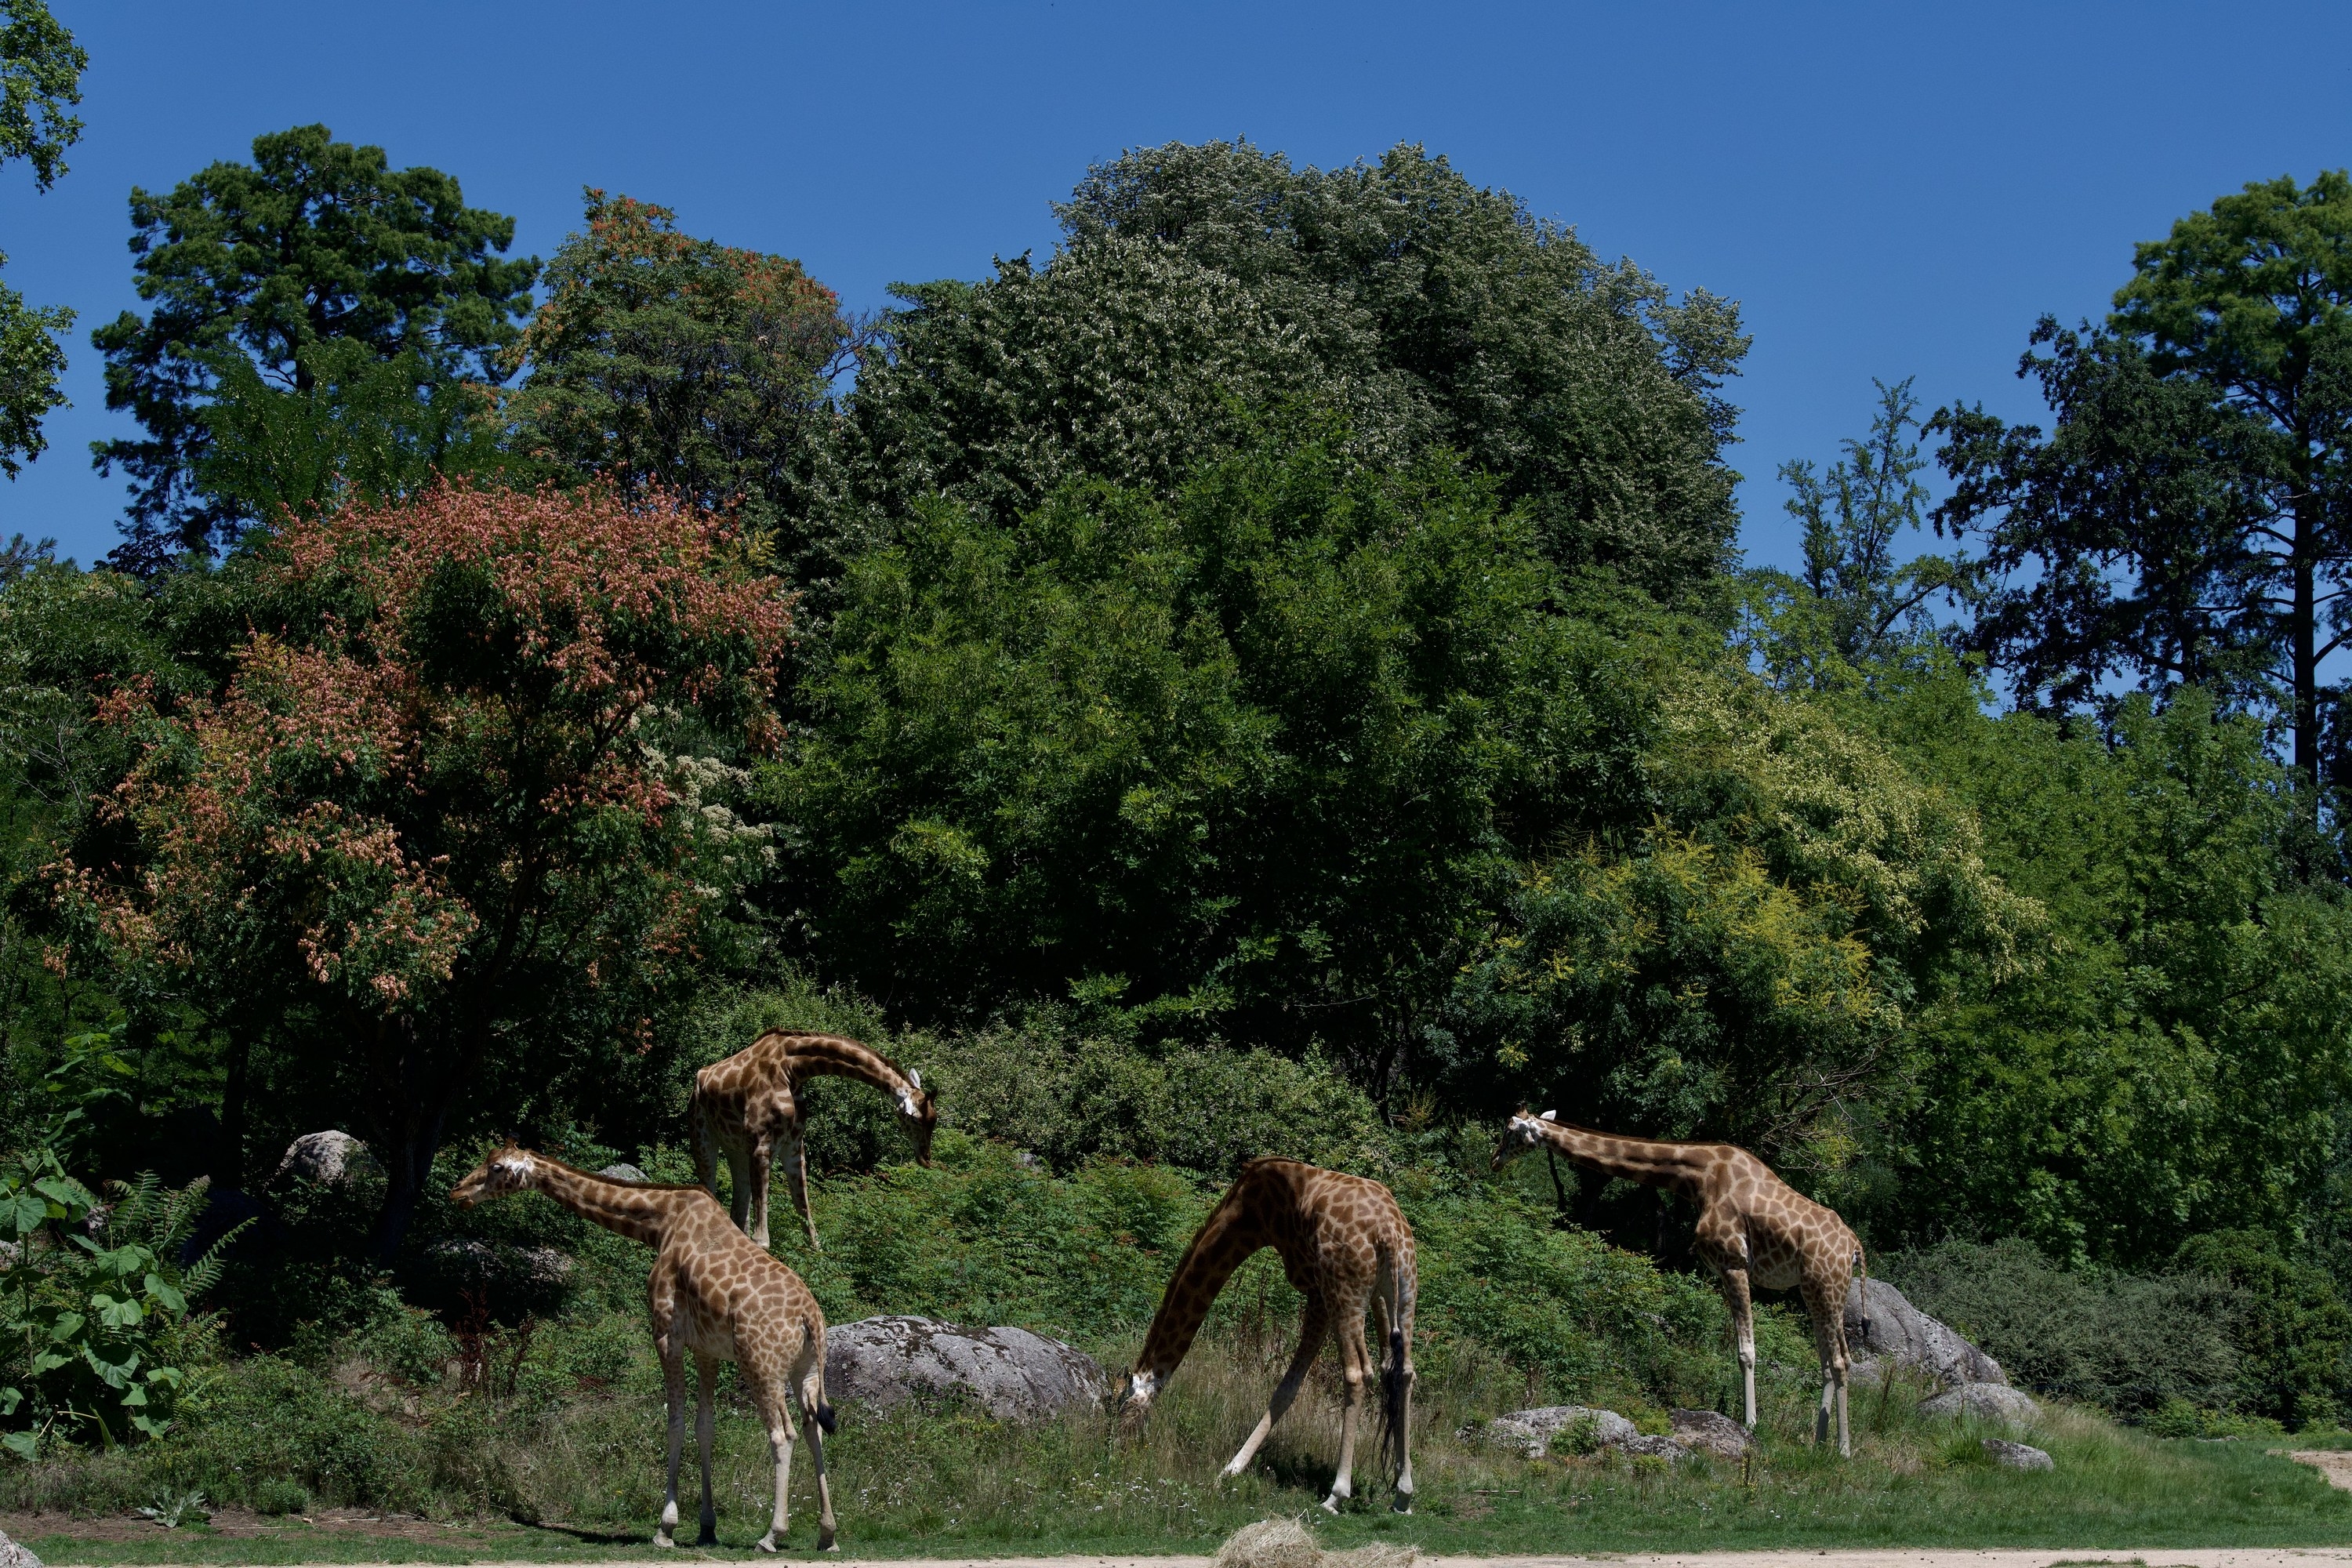 Family of four Giraffes feeding in the middle of a forest